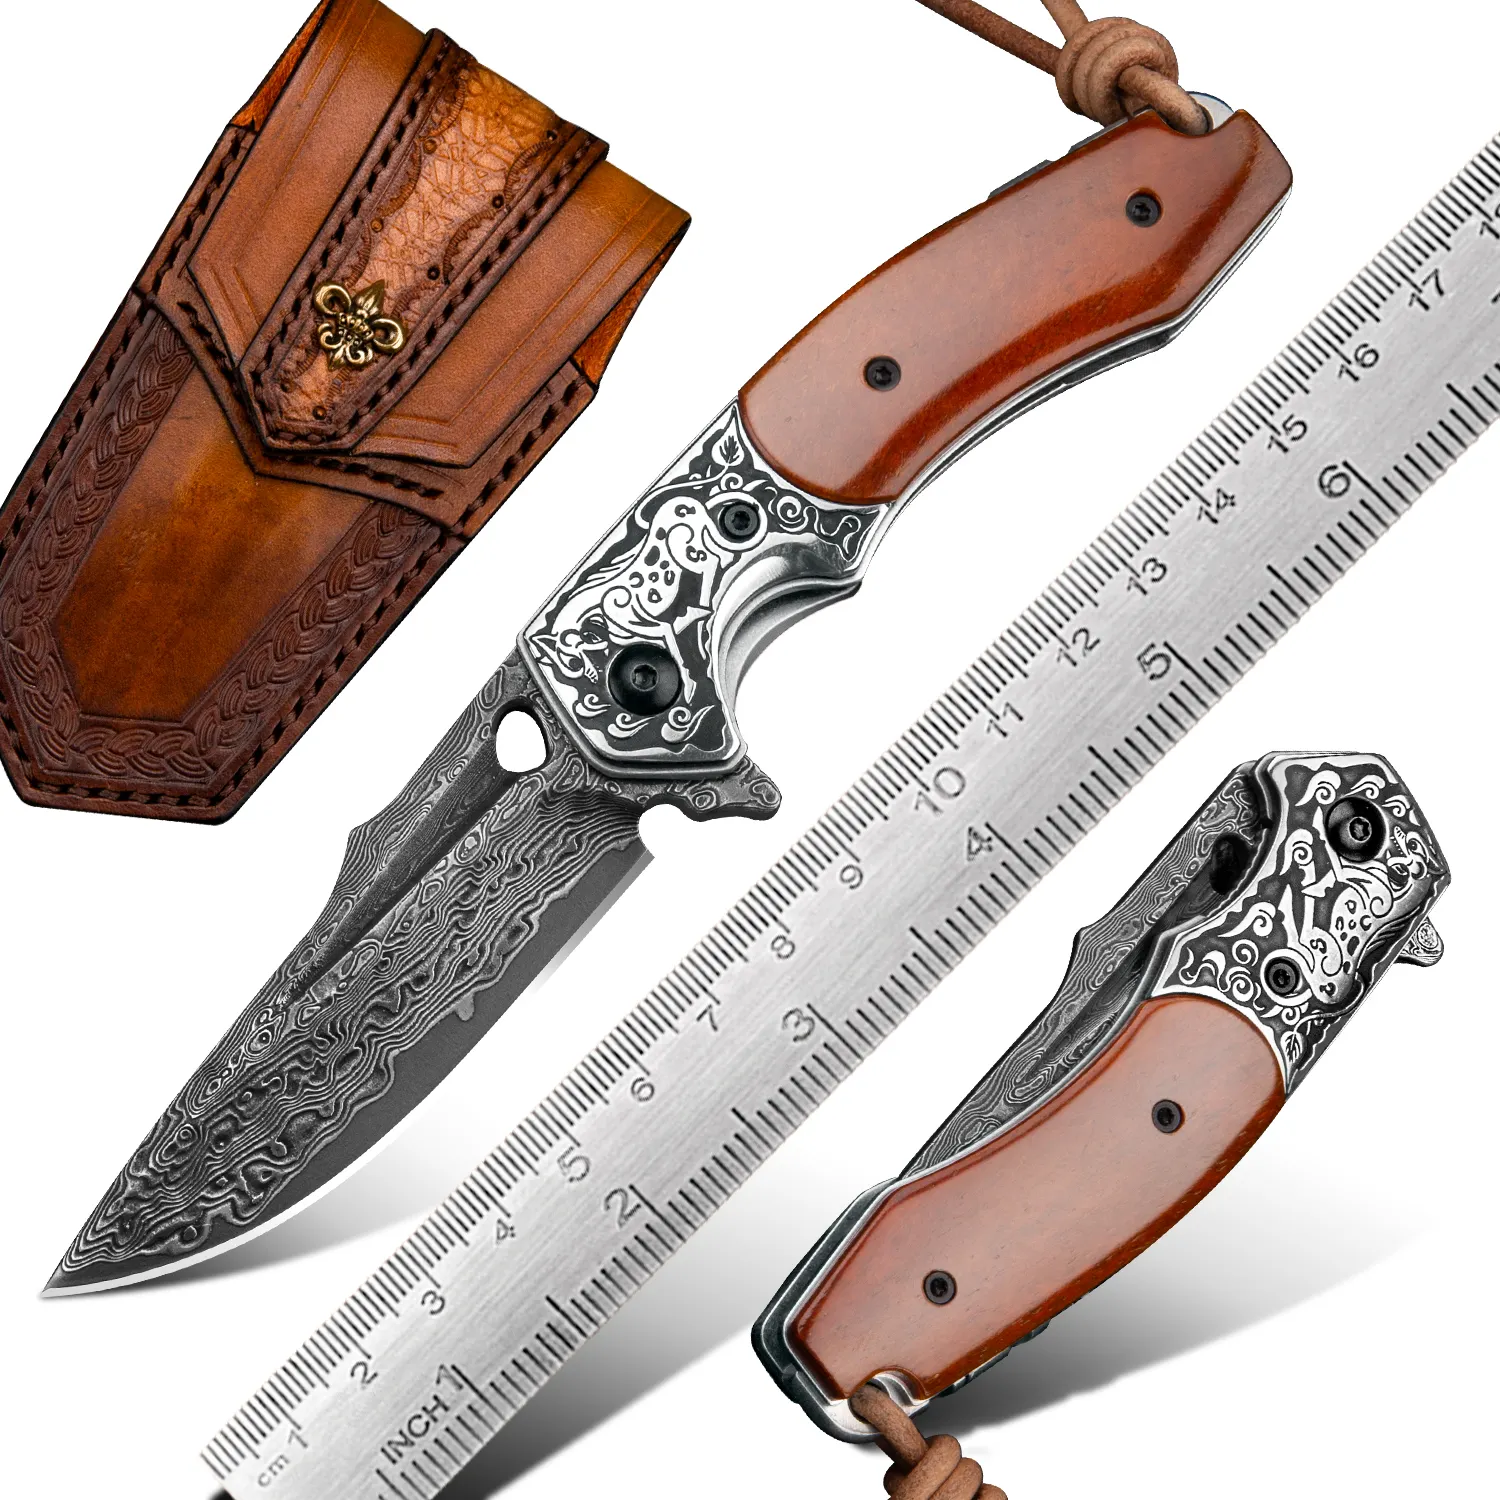 Bone Handle Hunting with Leather Sheath Tactical Damascus Steel Folding Knife EDC Outdoor Pocket Knives for Men